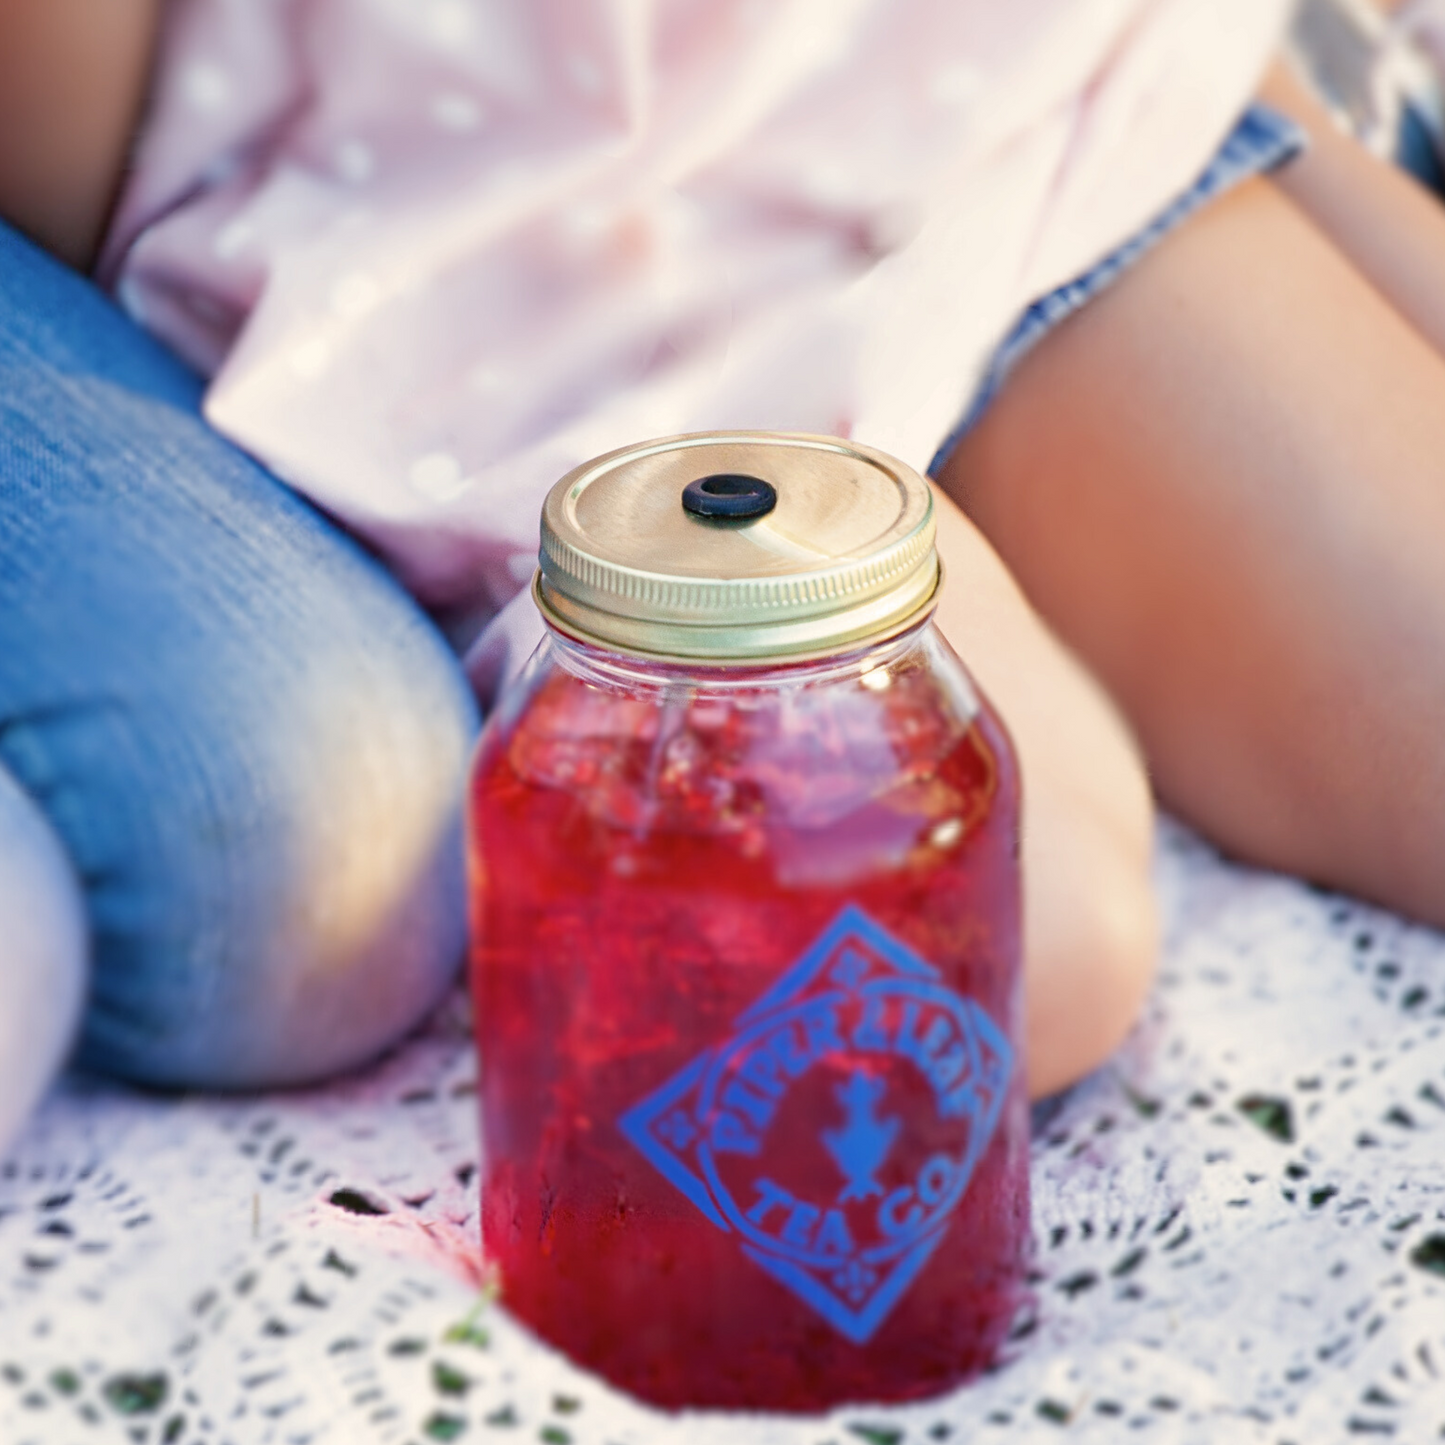 A girl sitting on a blanket next to a Mason jar filled with liquid and a Piper & Leaf Tea Co. Drinking Lid for Mason Jar.